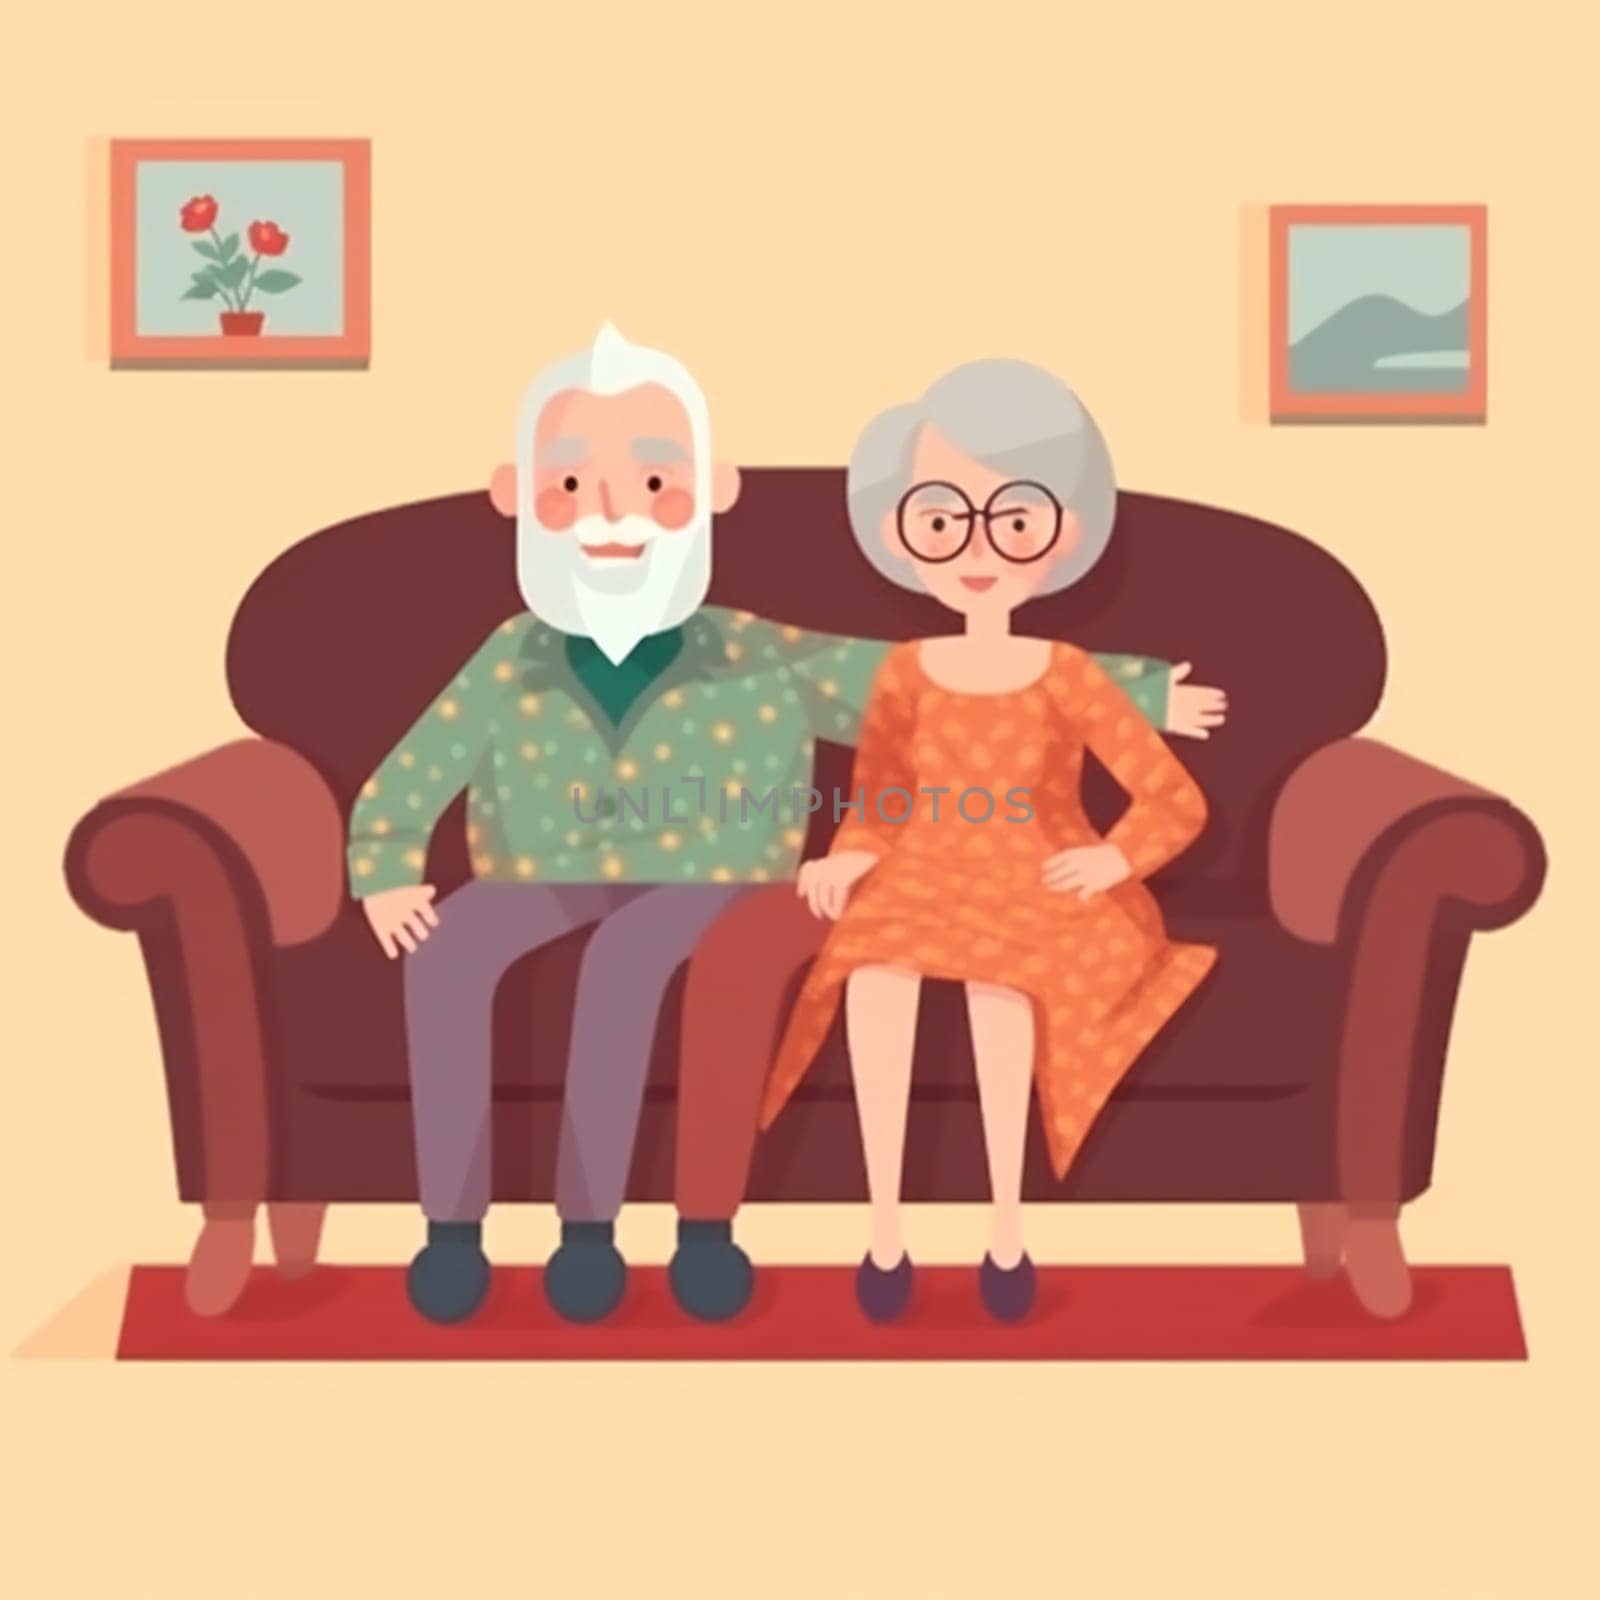 Social concept - old people couple. Happy senior man woman family sitting on the sofa and rest